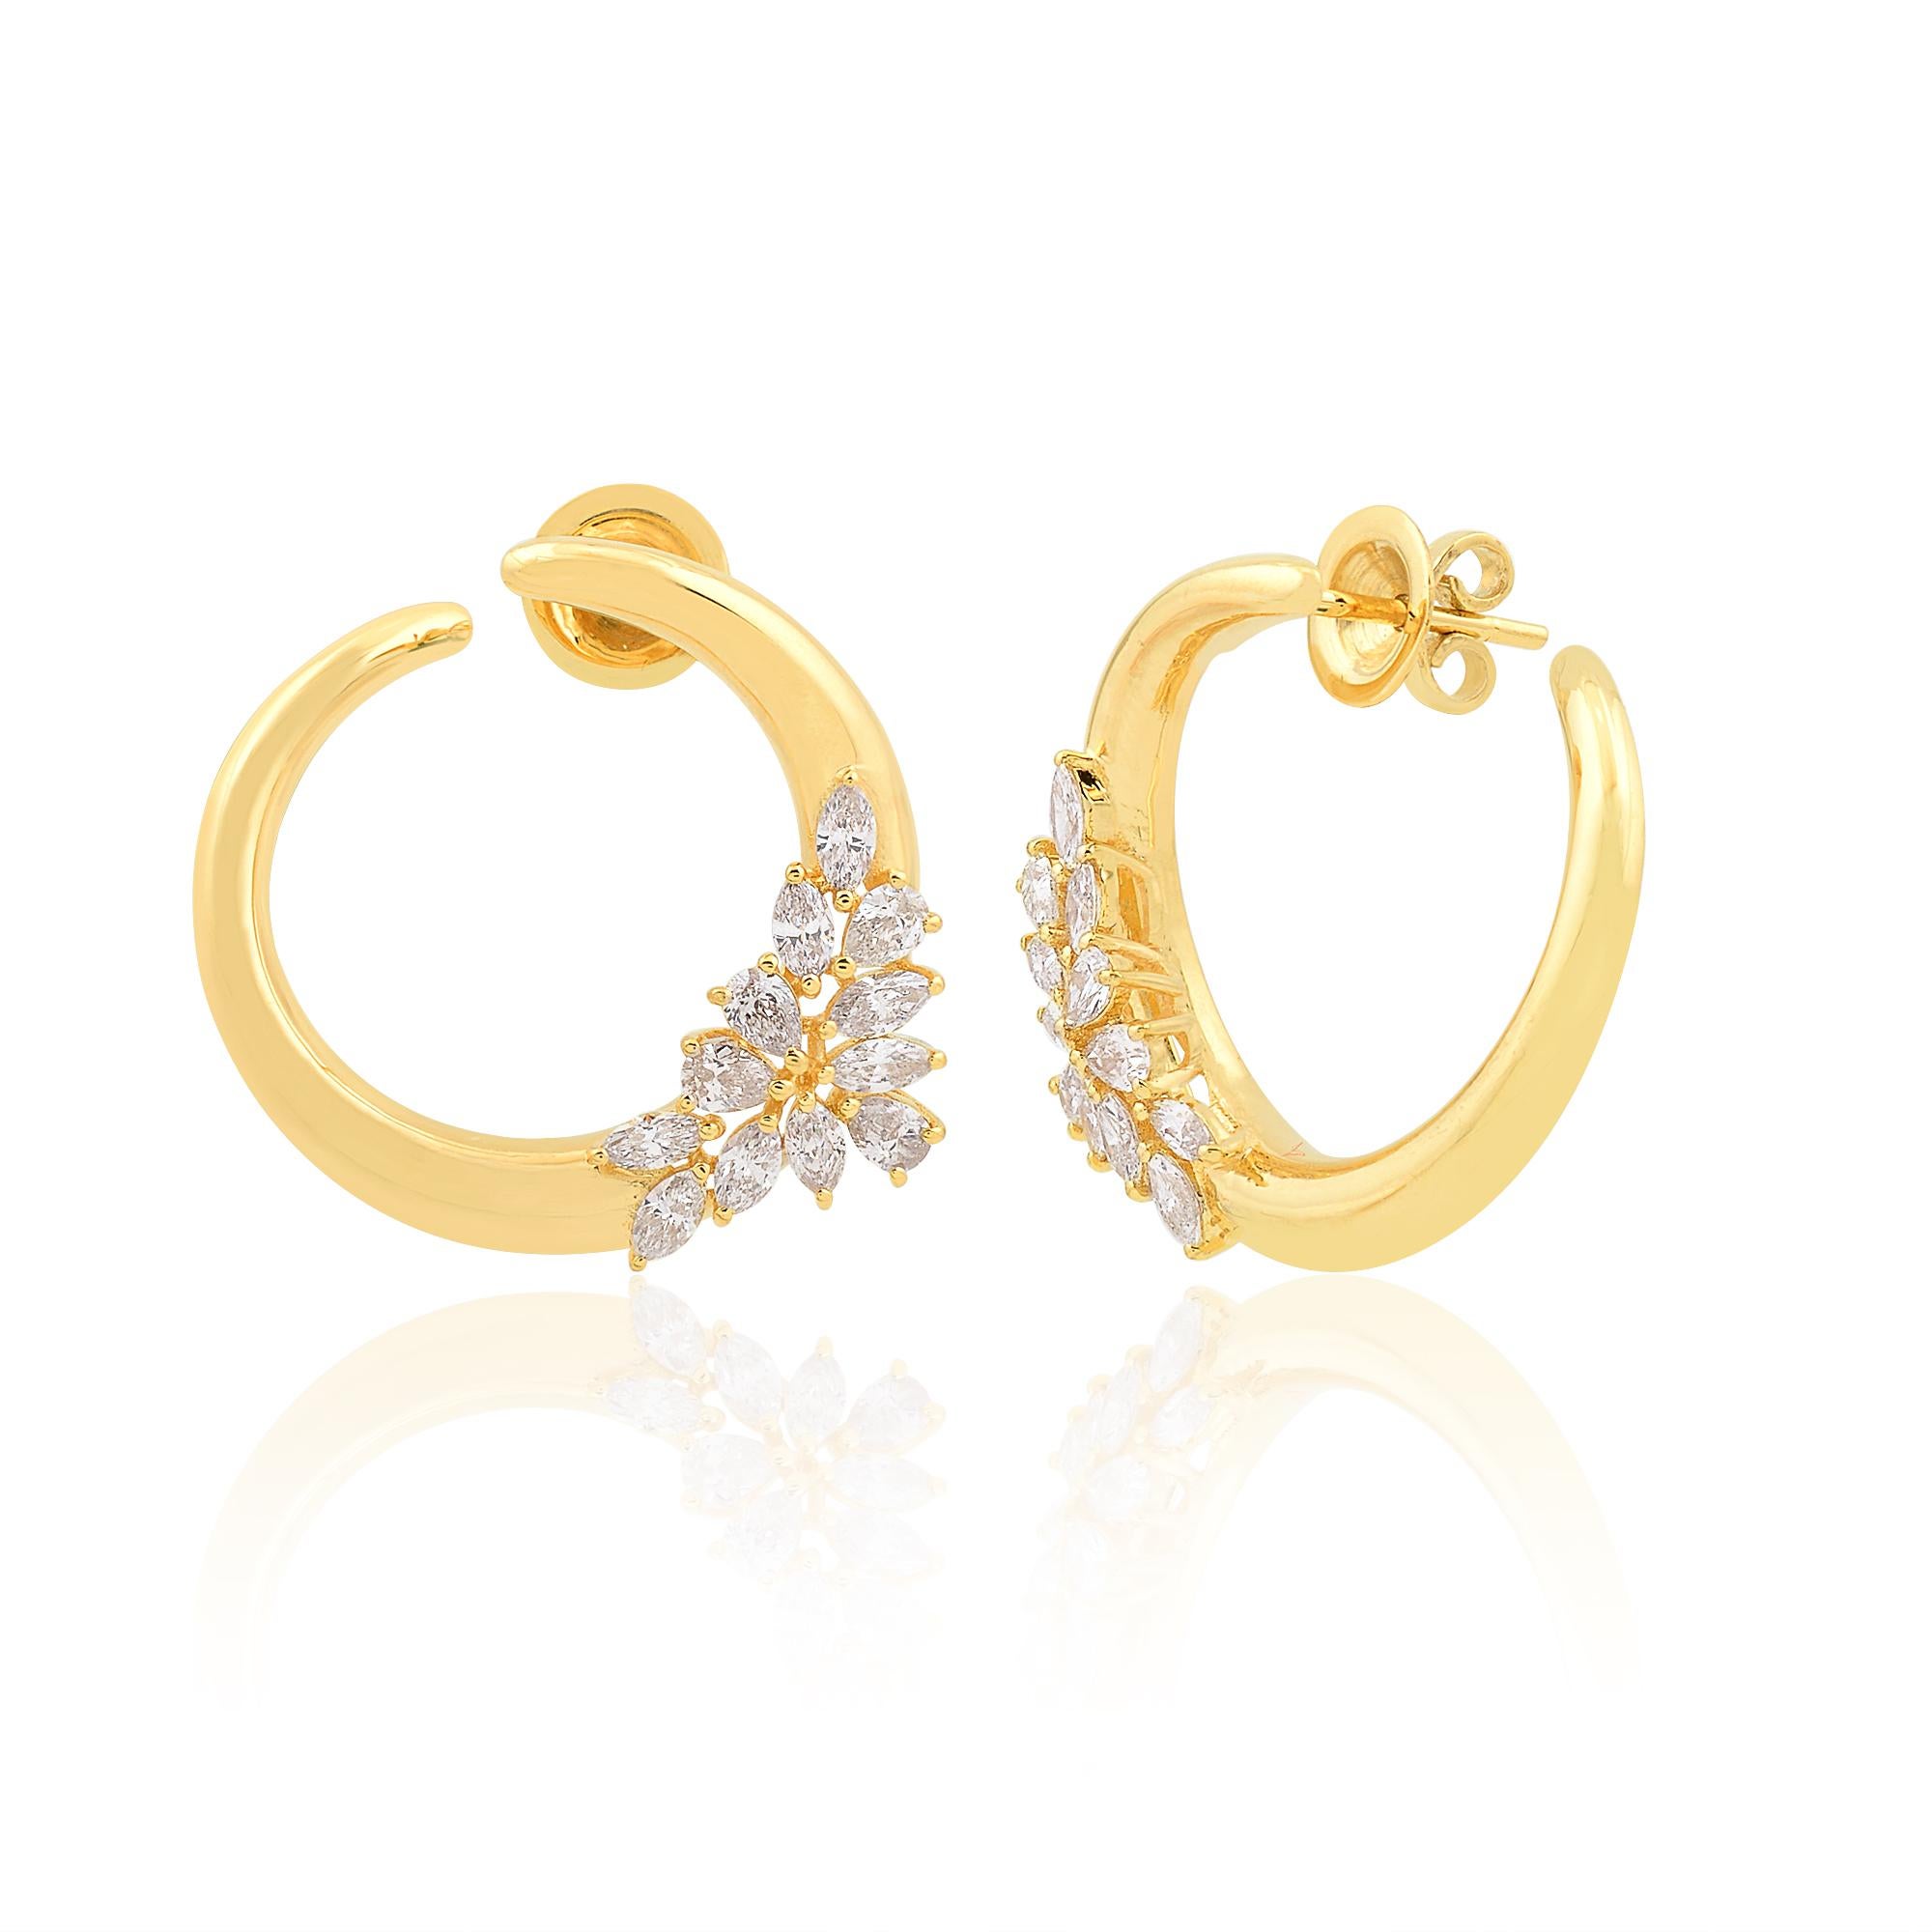 This Hoop earrings are designed in a circular shape that curves around the earlobe, offering a classic and versatile style that can be worn for various occasions.

Item Code :- SEE-1815B
Gross Wt. :- 7.72 gm
18k Yellow Gold Wt. :- 7.40 gm
Natural